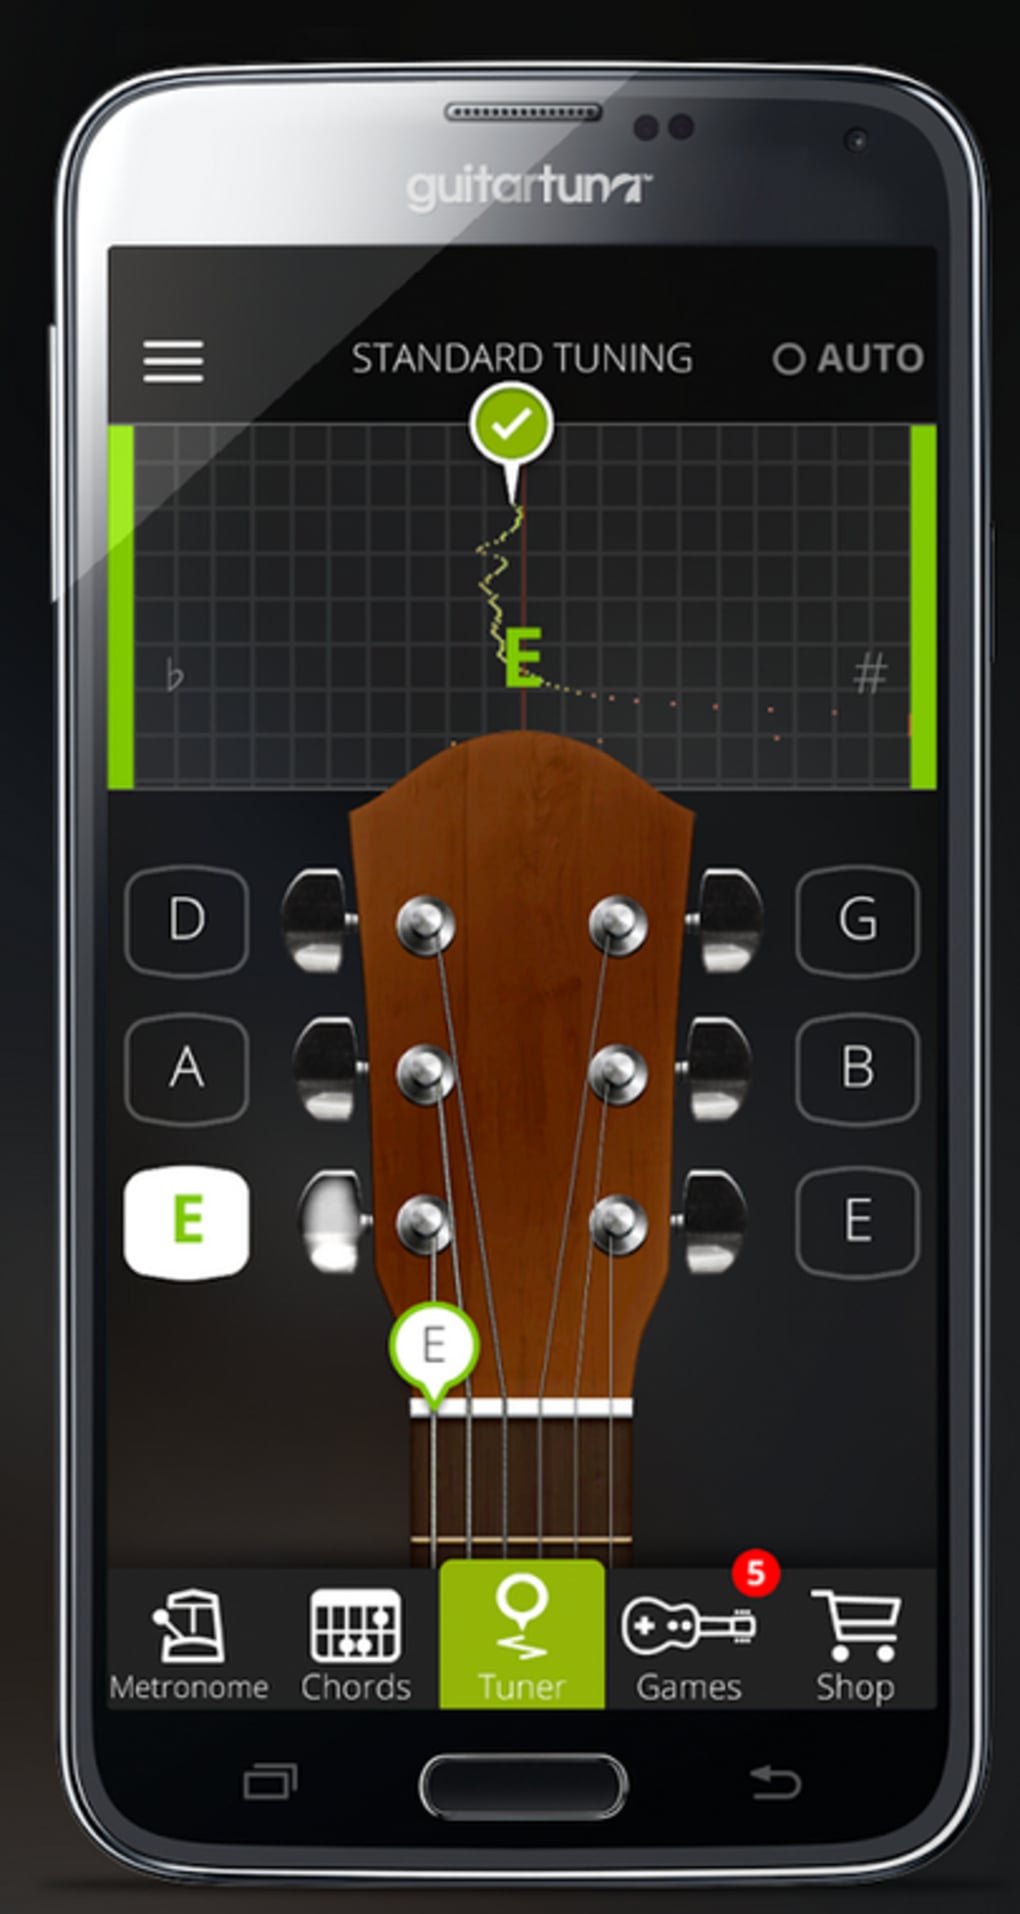 Download Guitar Tuner Apk For Android 2.3.6